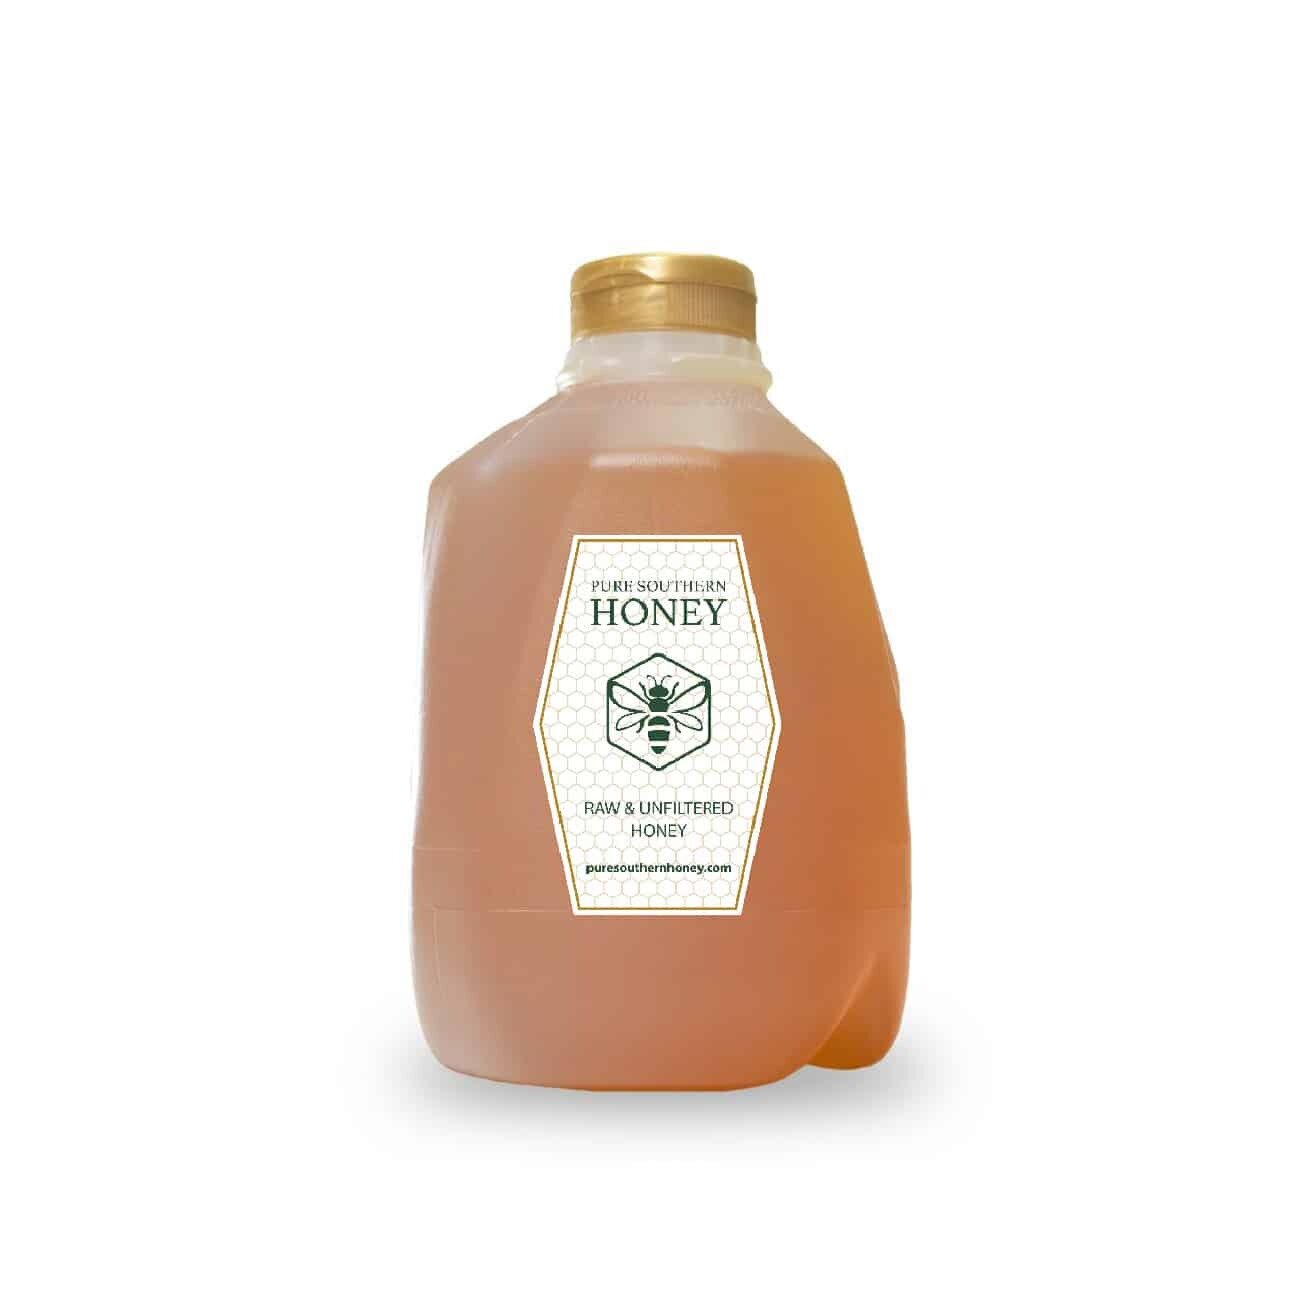 Raw & Unfiltered Honey - 3lbs